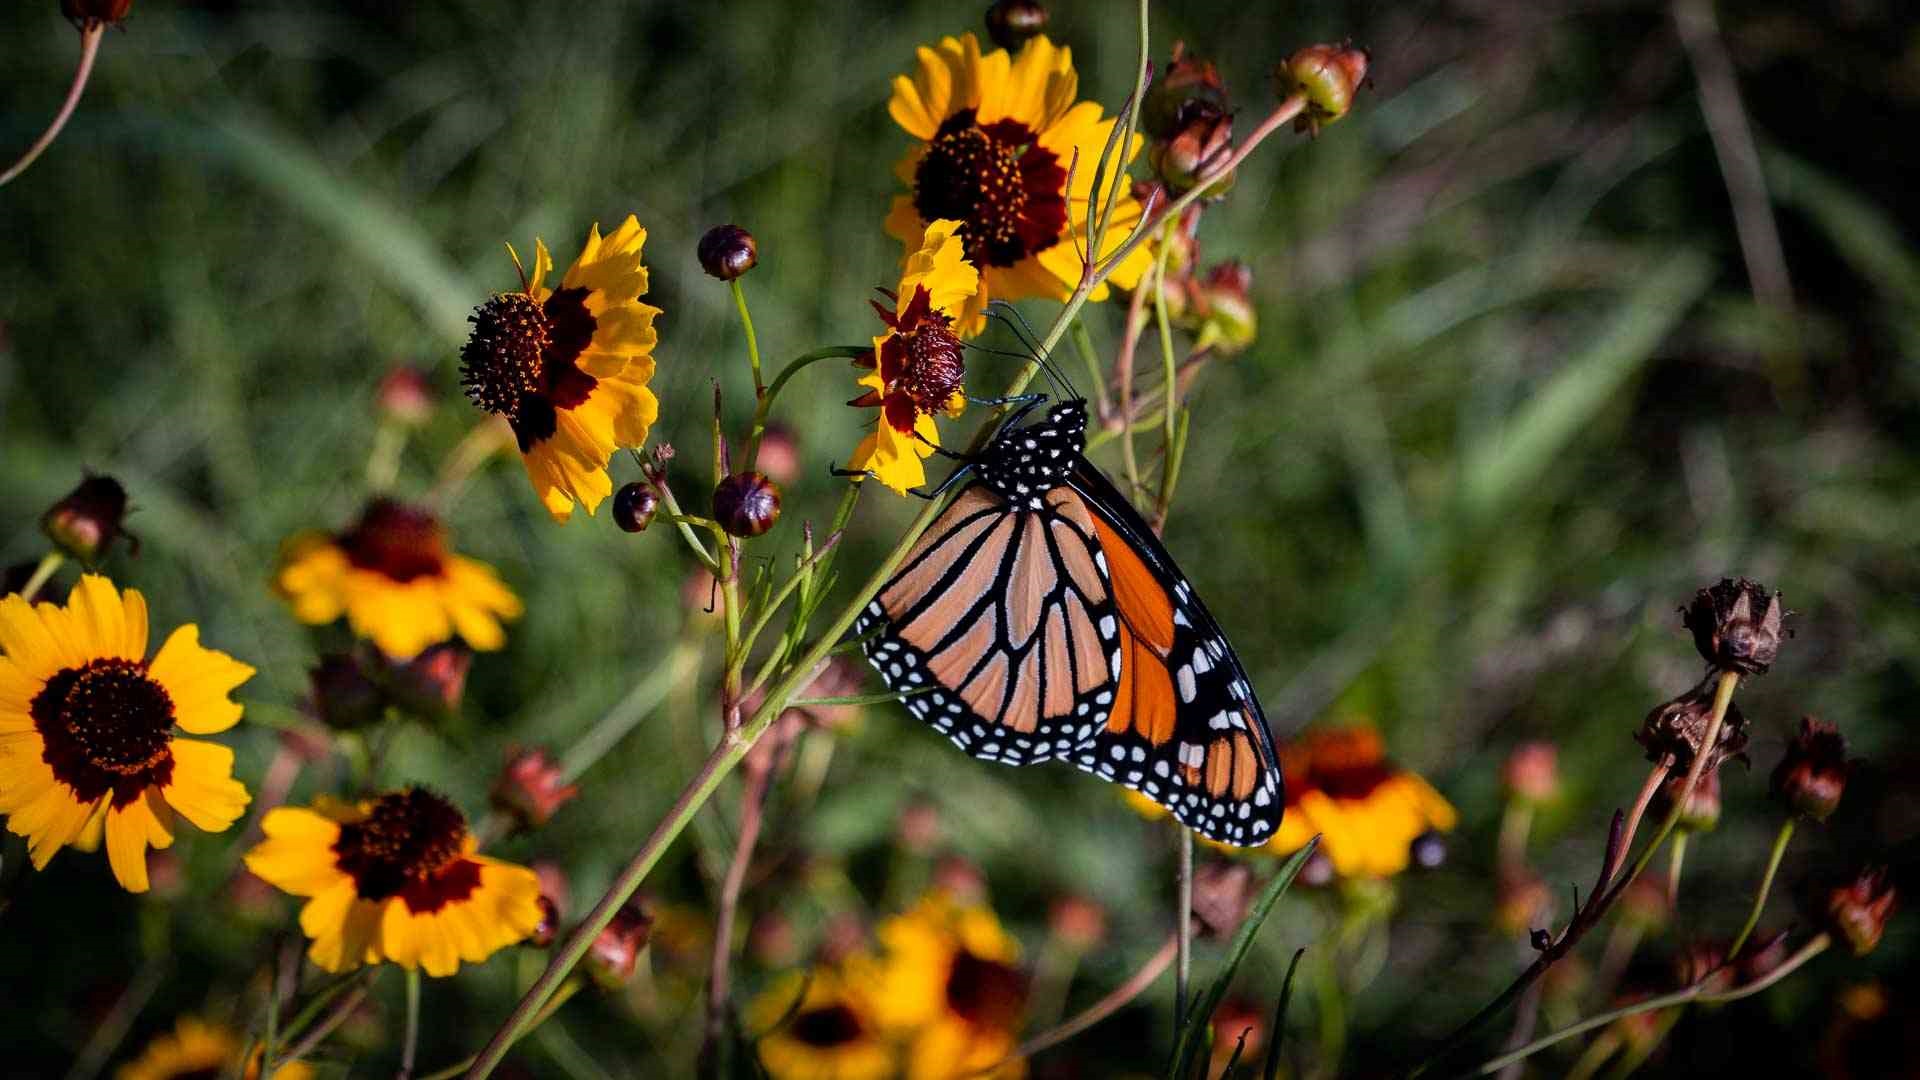 Photo shows monarch butterfly feeding on flowers at the park.